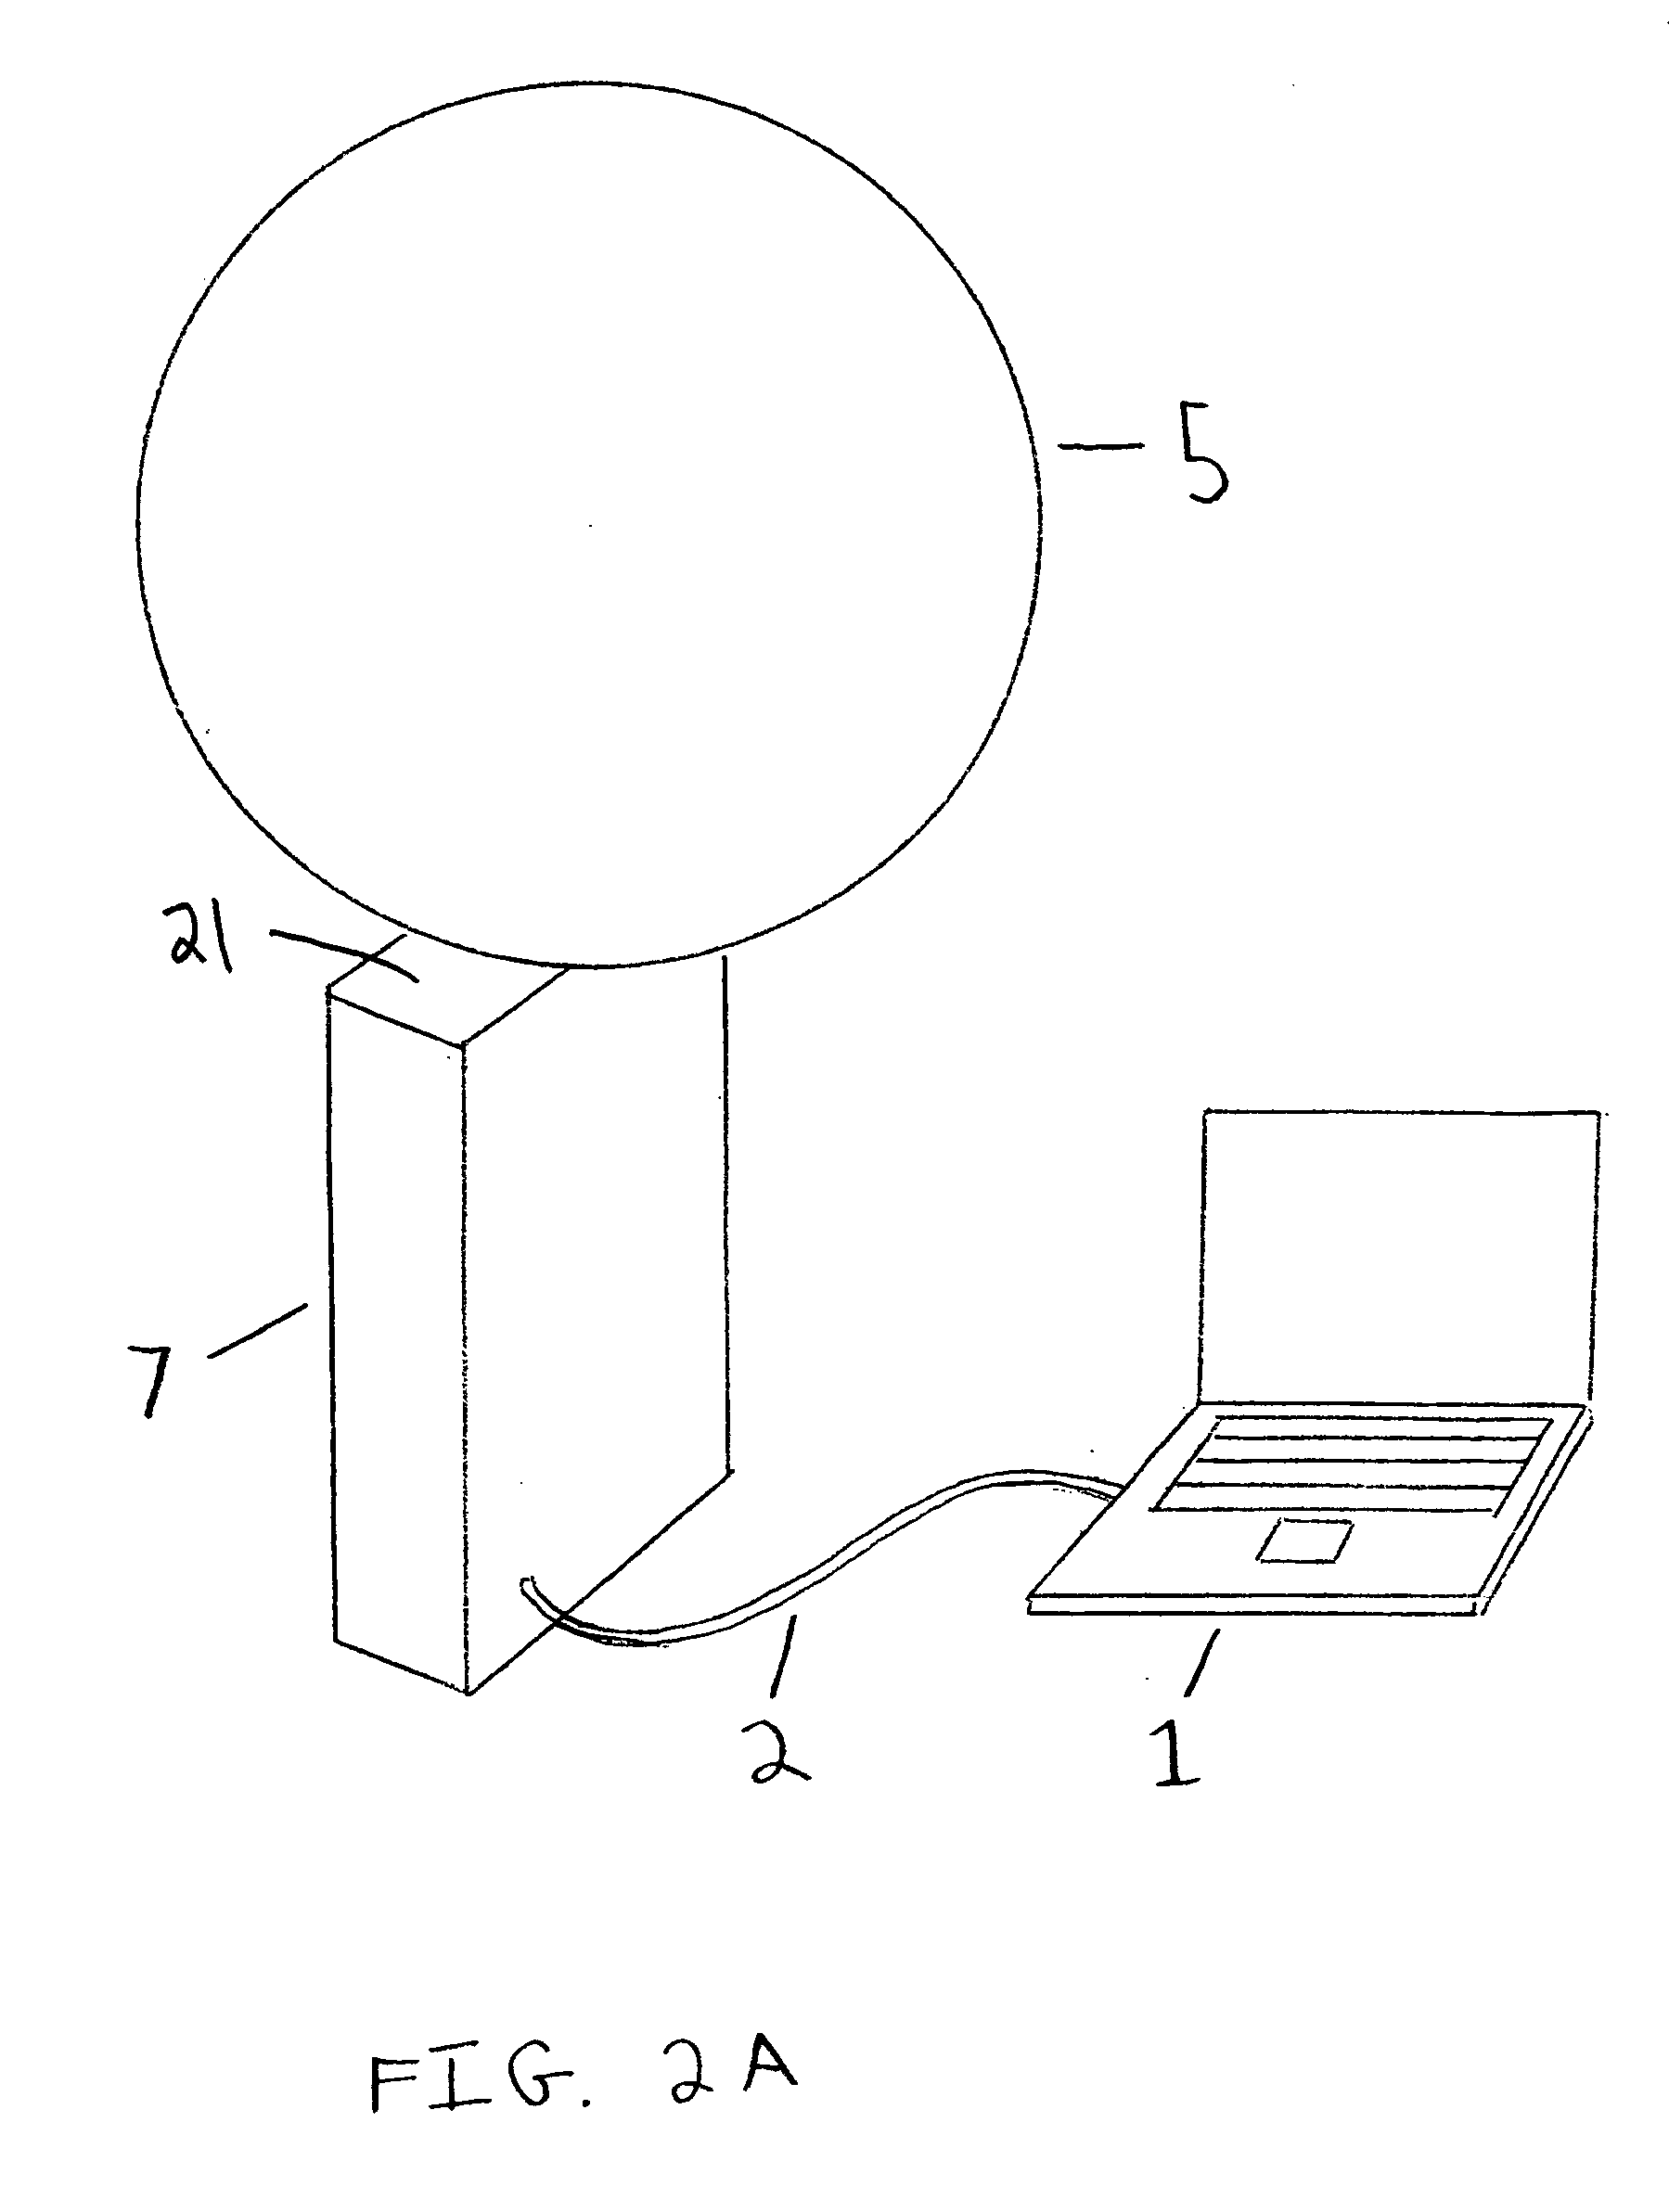 Display system having a three-dimensional convex display surface